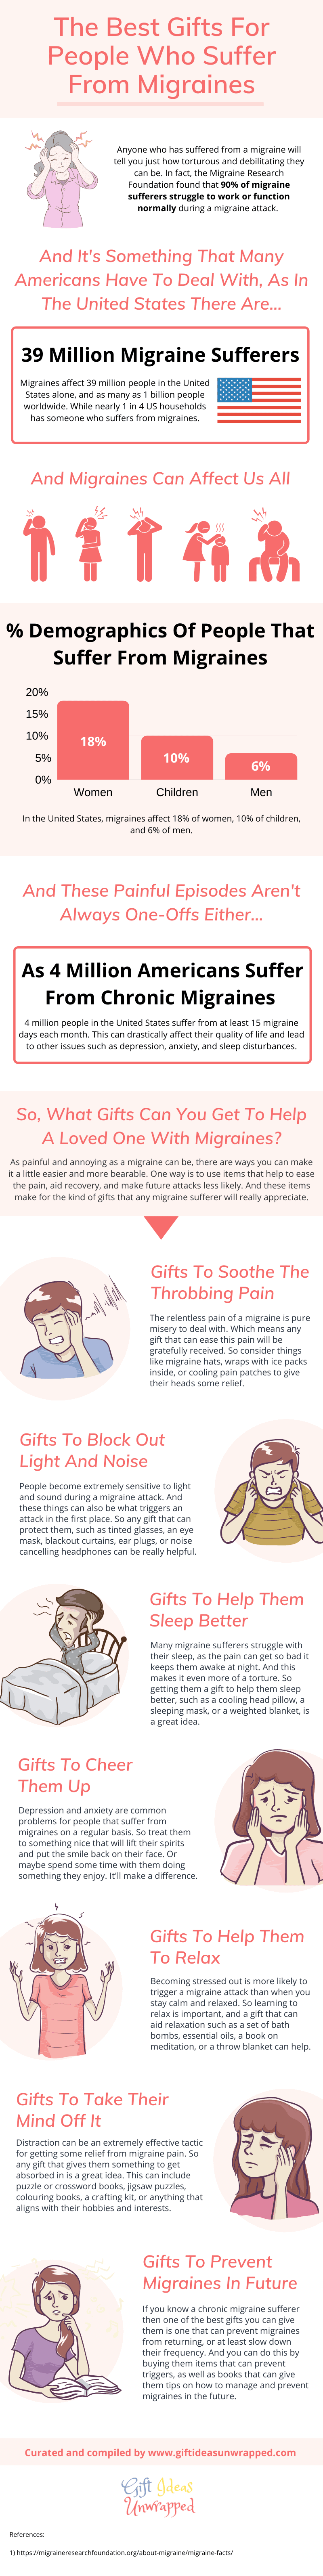 Best gifts for migraine sufferers infographic